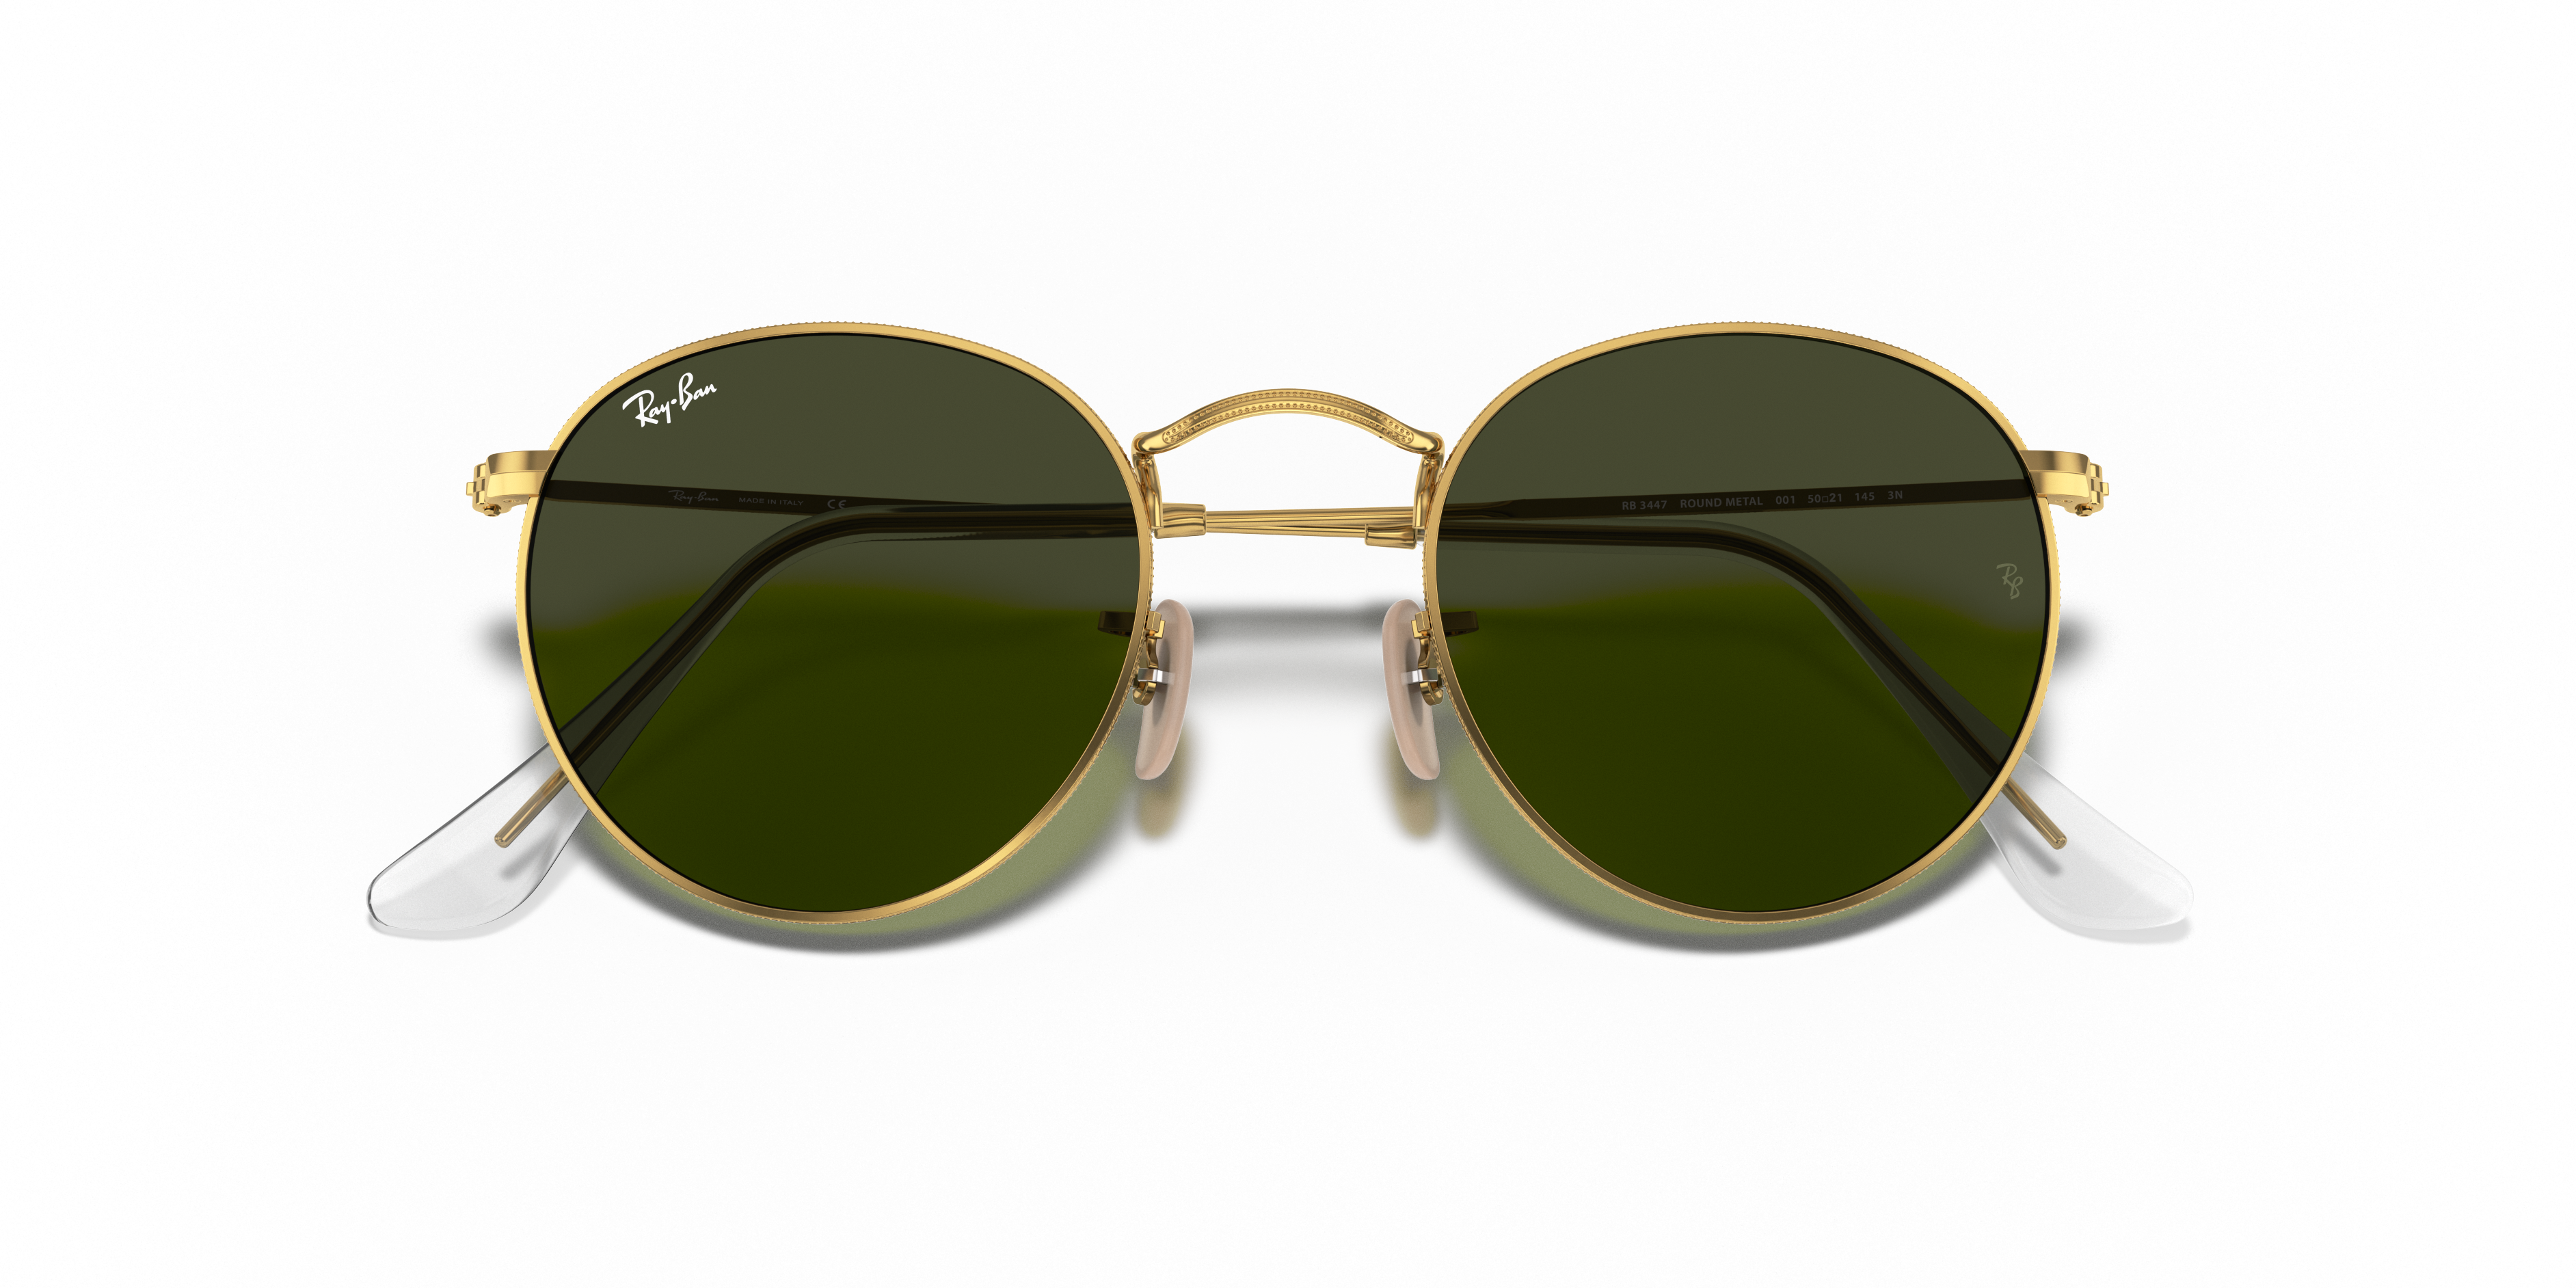 Ray-Ban 0RB3447 in Gold Sunglasses | OPSM